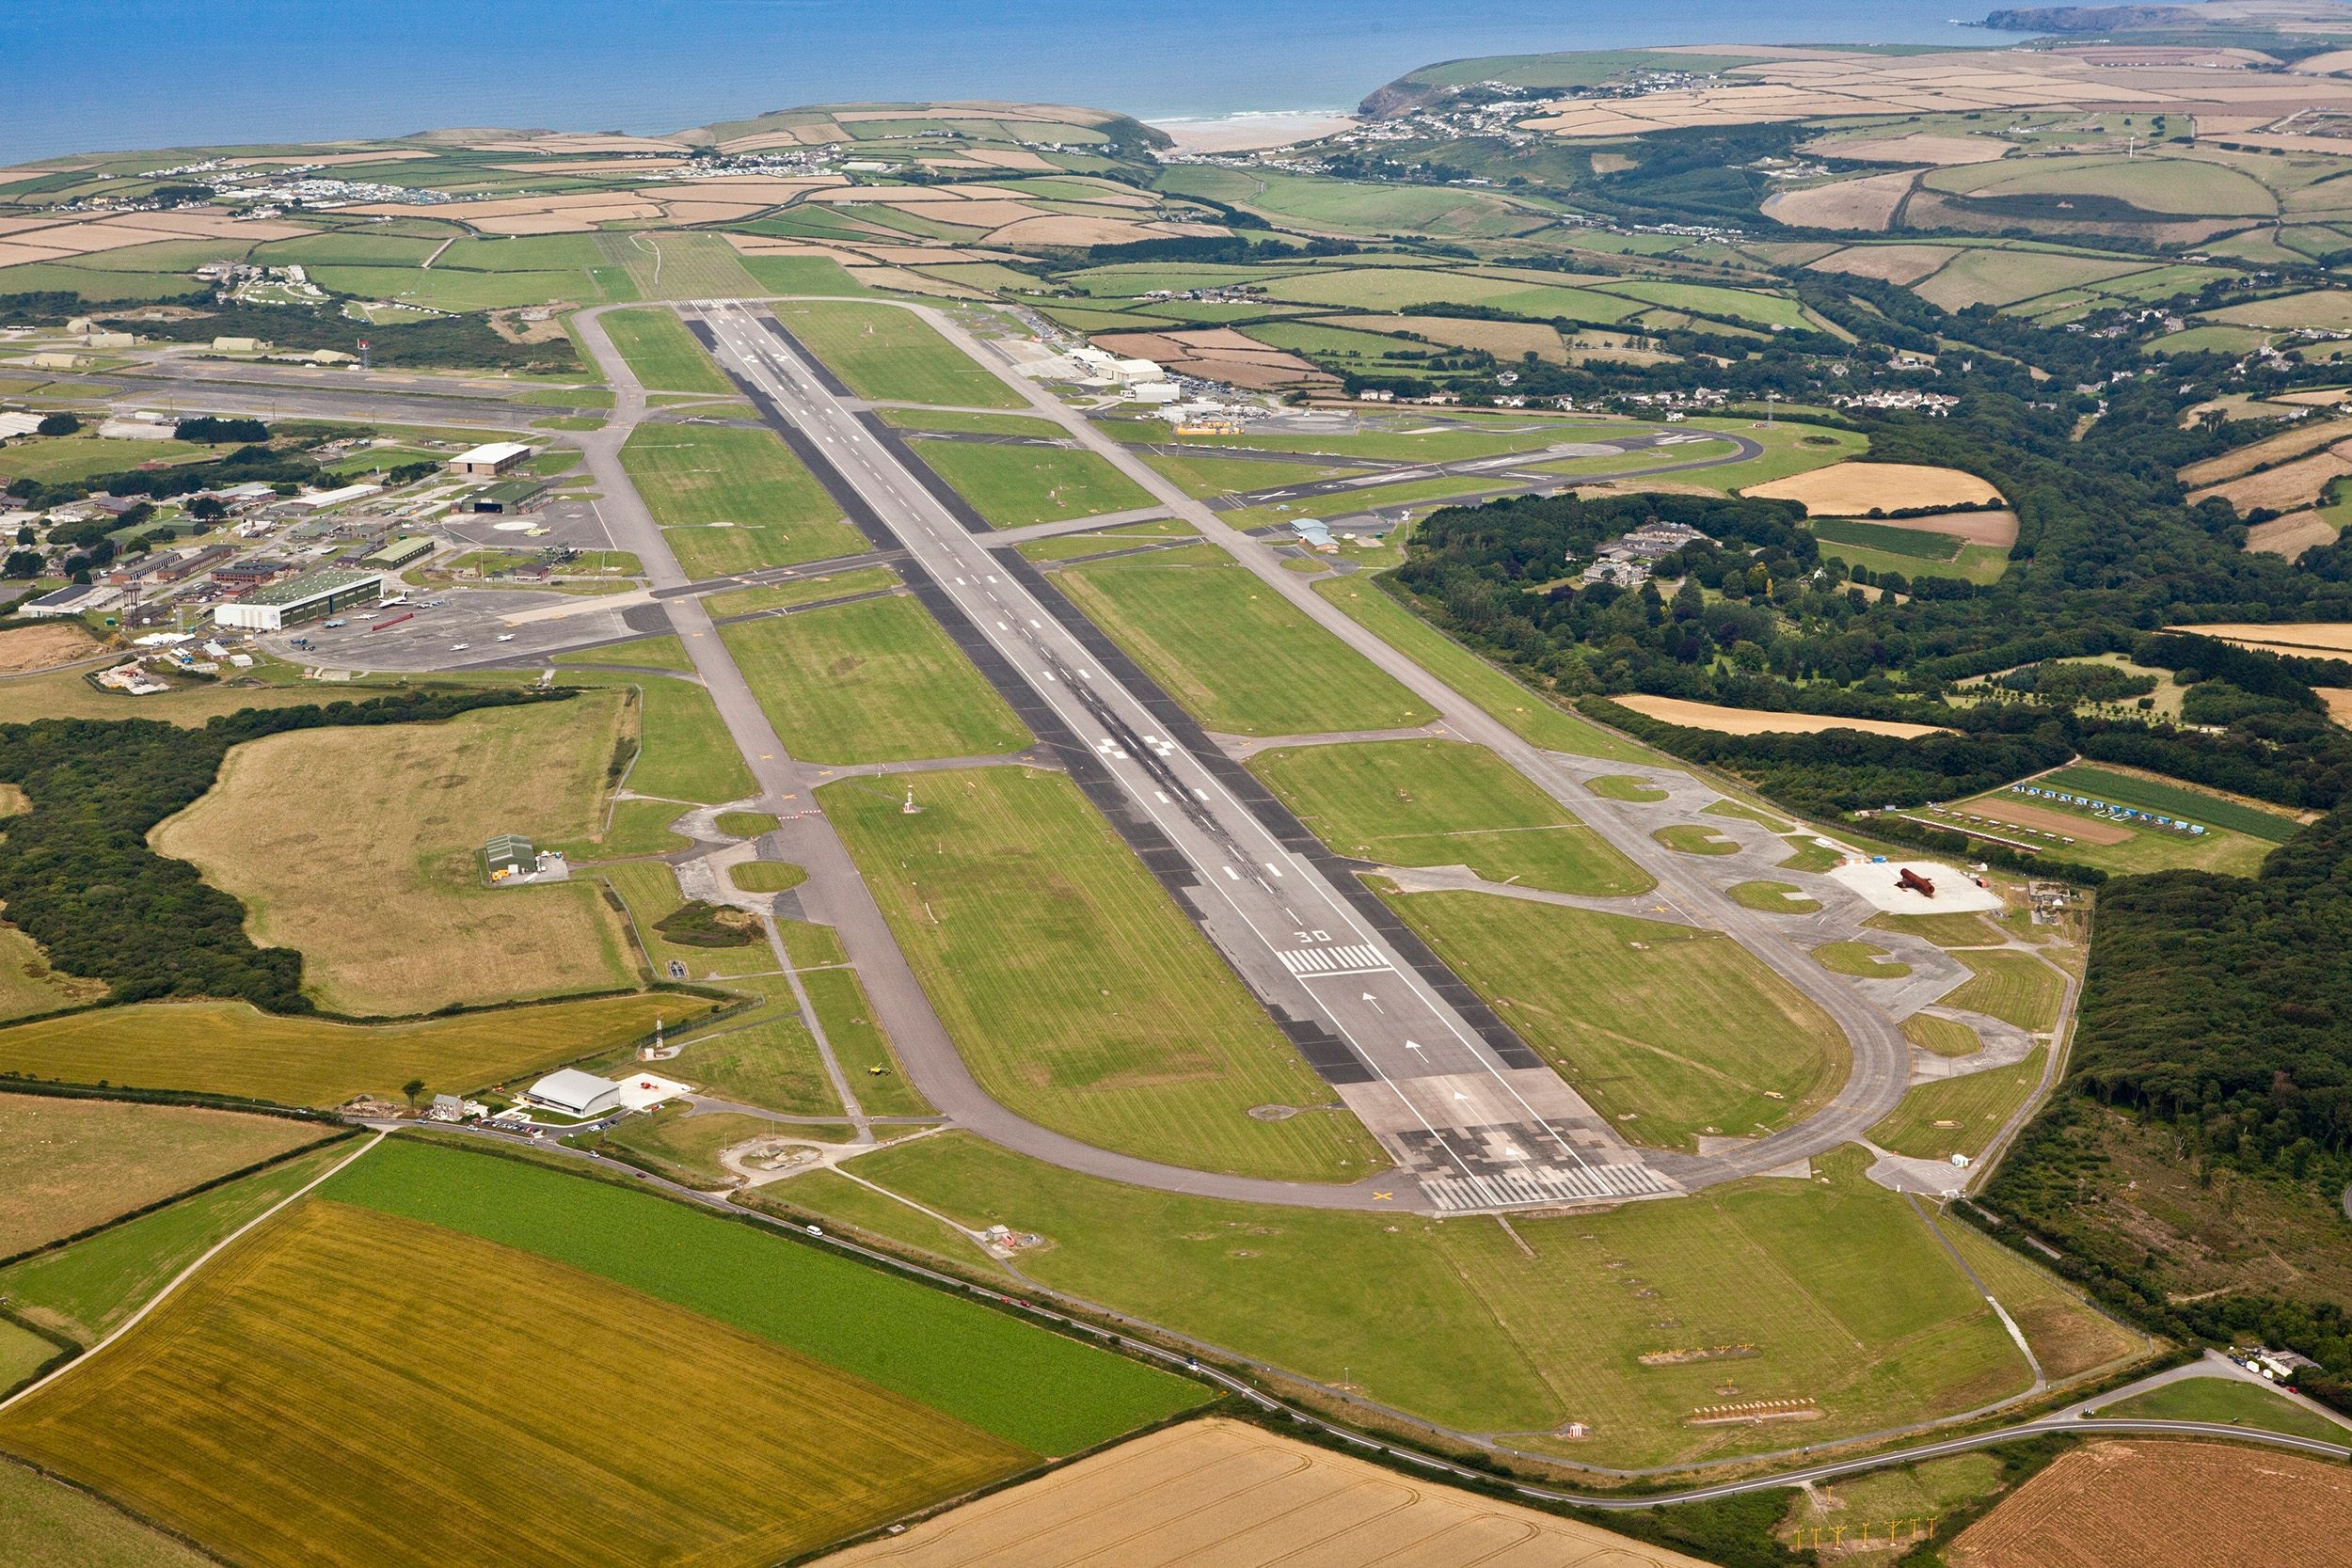 Cornwall Airport Newquay Aerial View